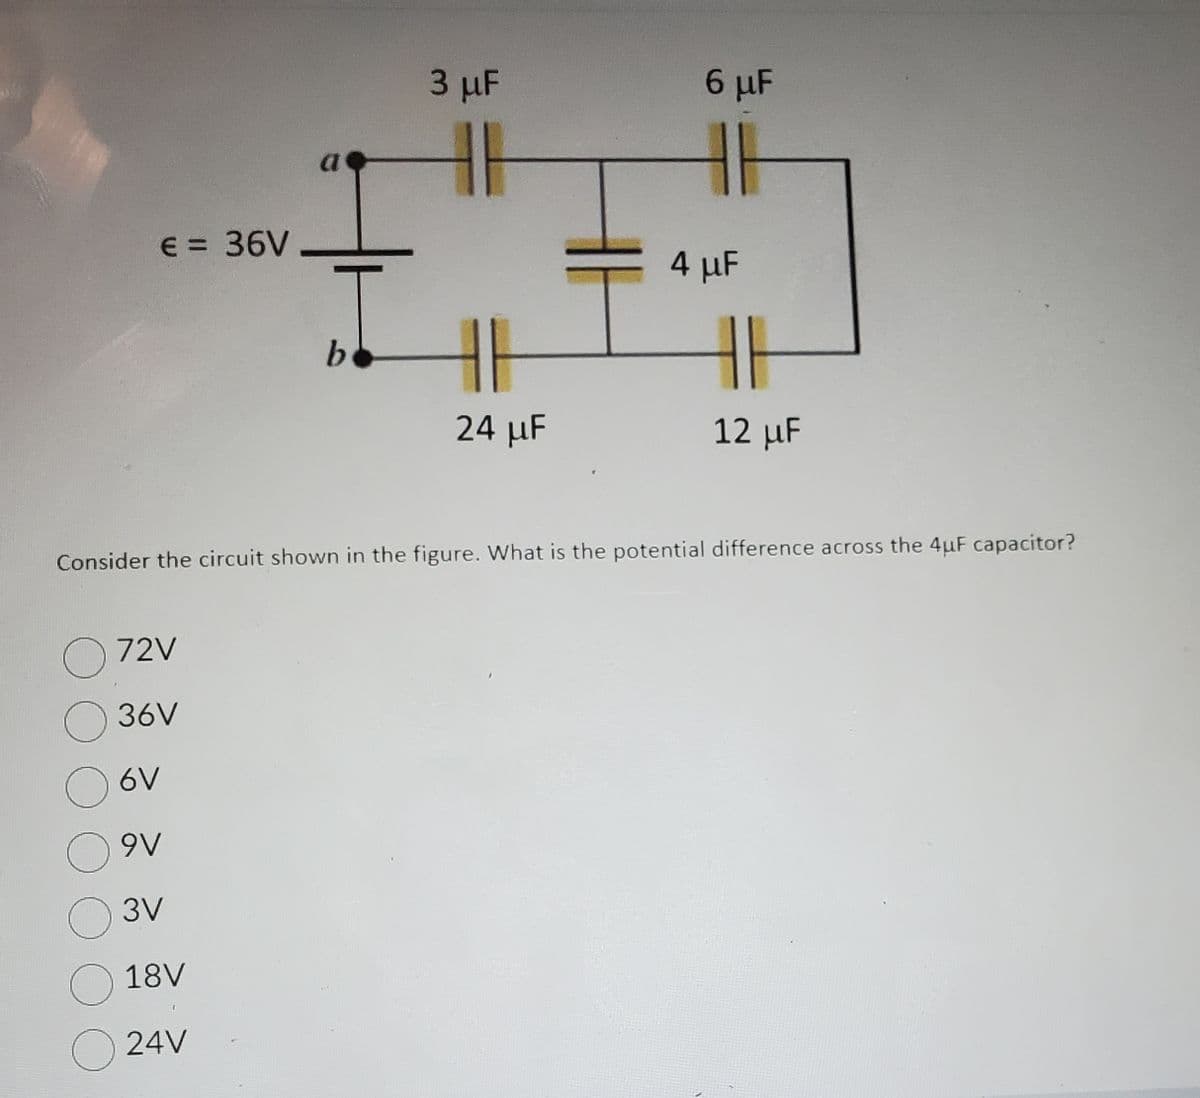 € = 36V
O 72V
36V
a
O ov
09V
3V
18V
24V
b
3 μF
24 μF
6 μF
4 μF
Consider the circuit shown in the figure. What is the potential difference across the 4uF capacitor?
11
12 μF